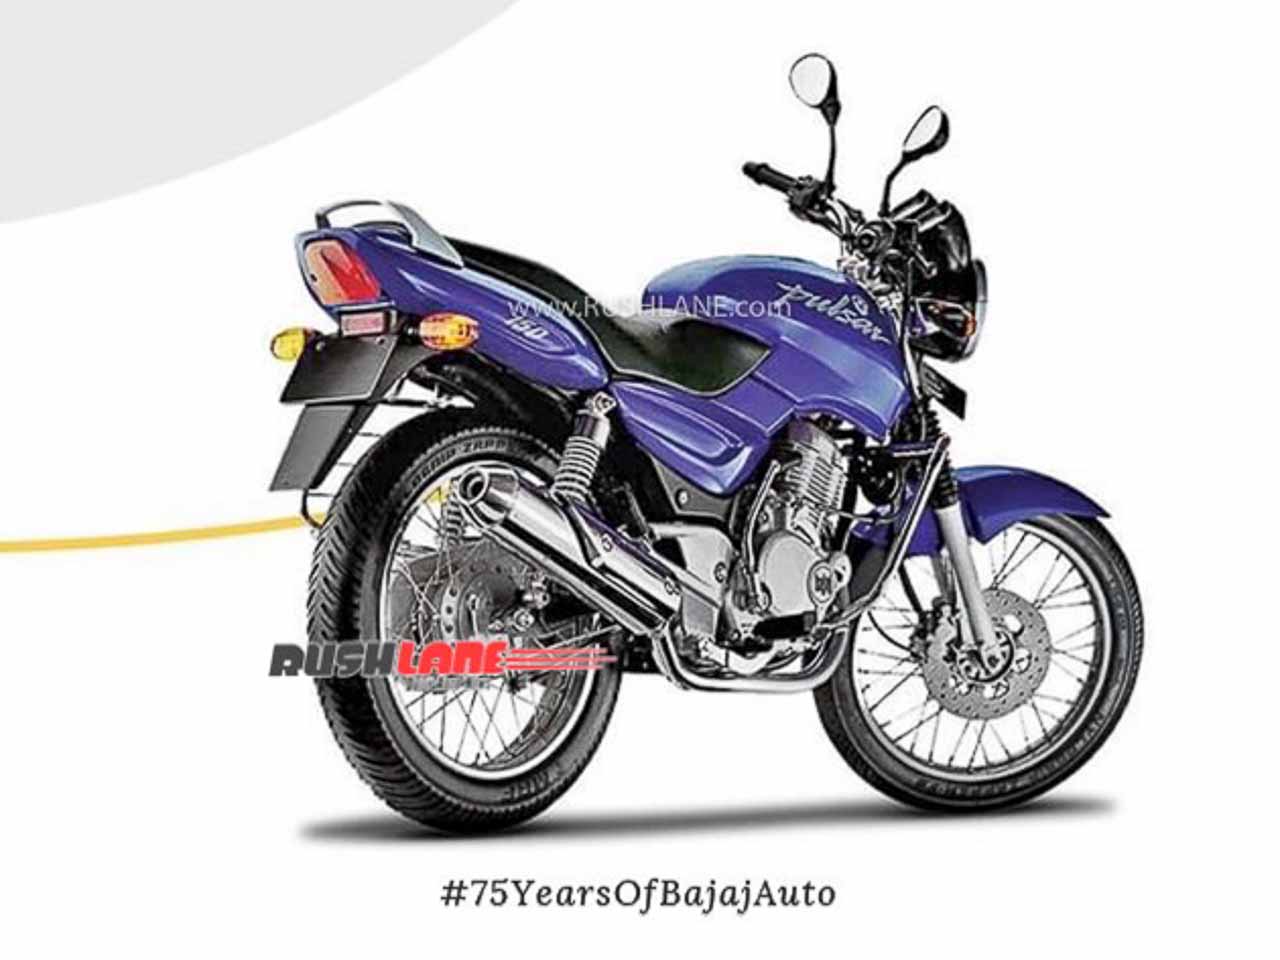 Bajaj Pulsar Completes 20 Years All Pulsar Variants Launched Till Date